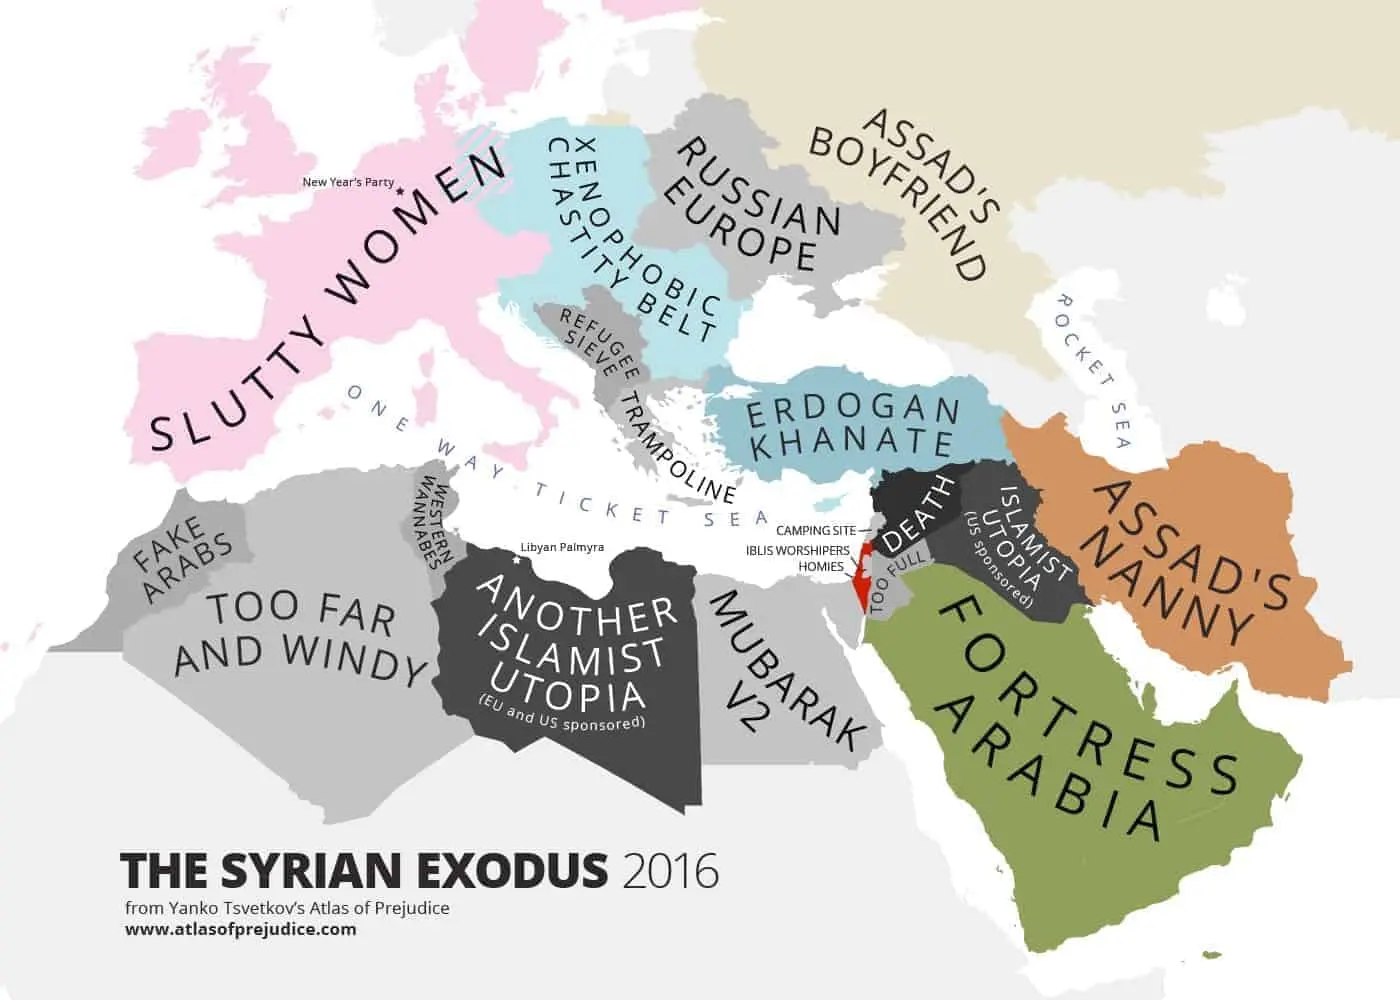 The Map of the Syrian Exodus 2016